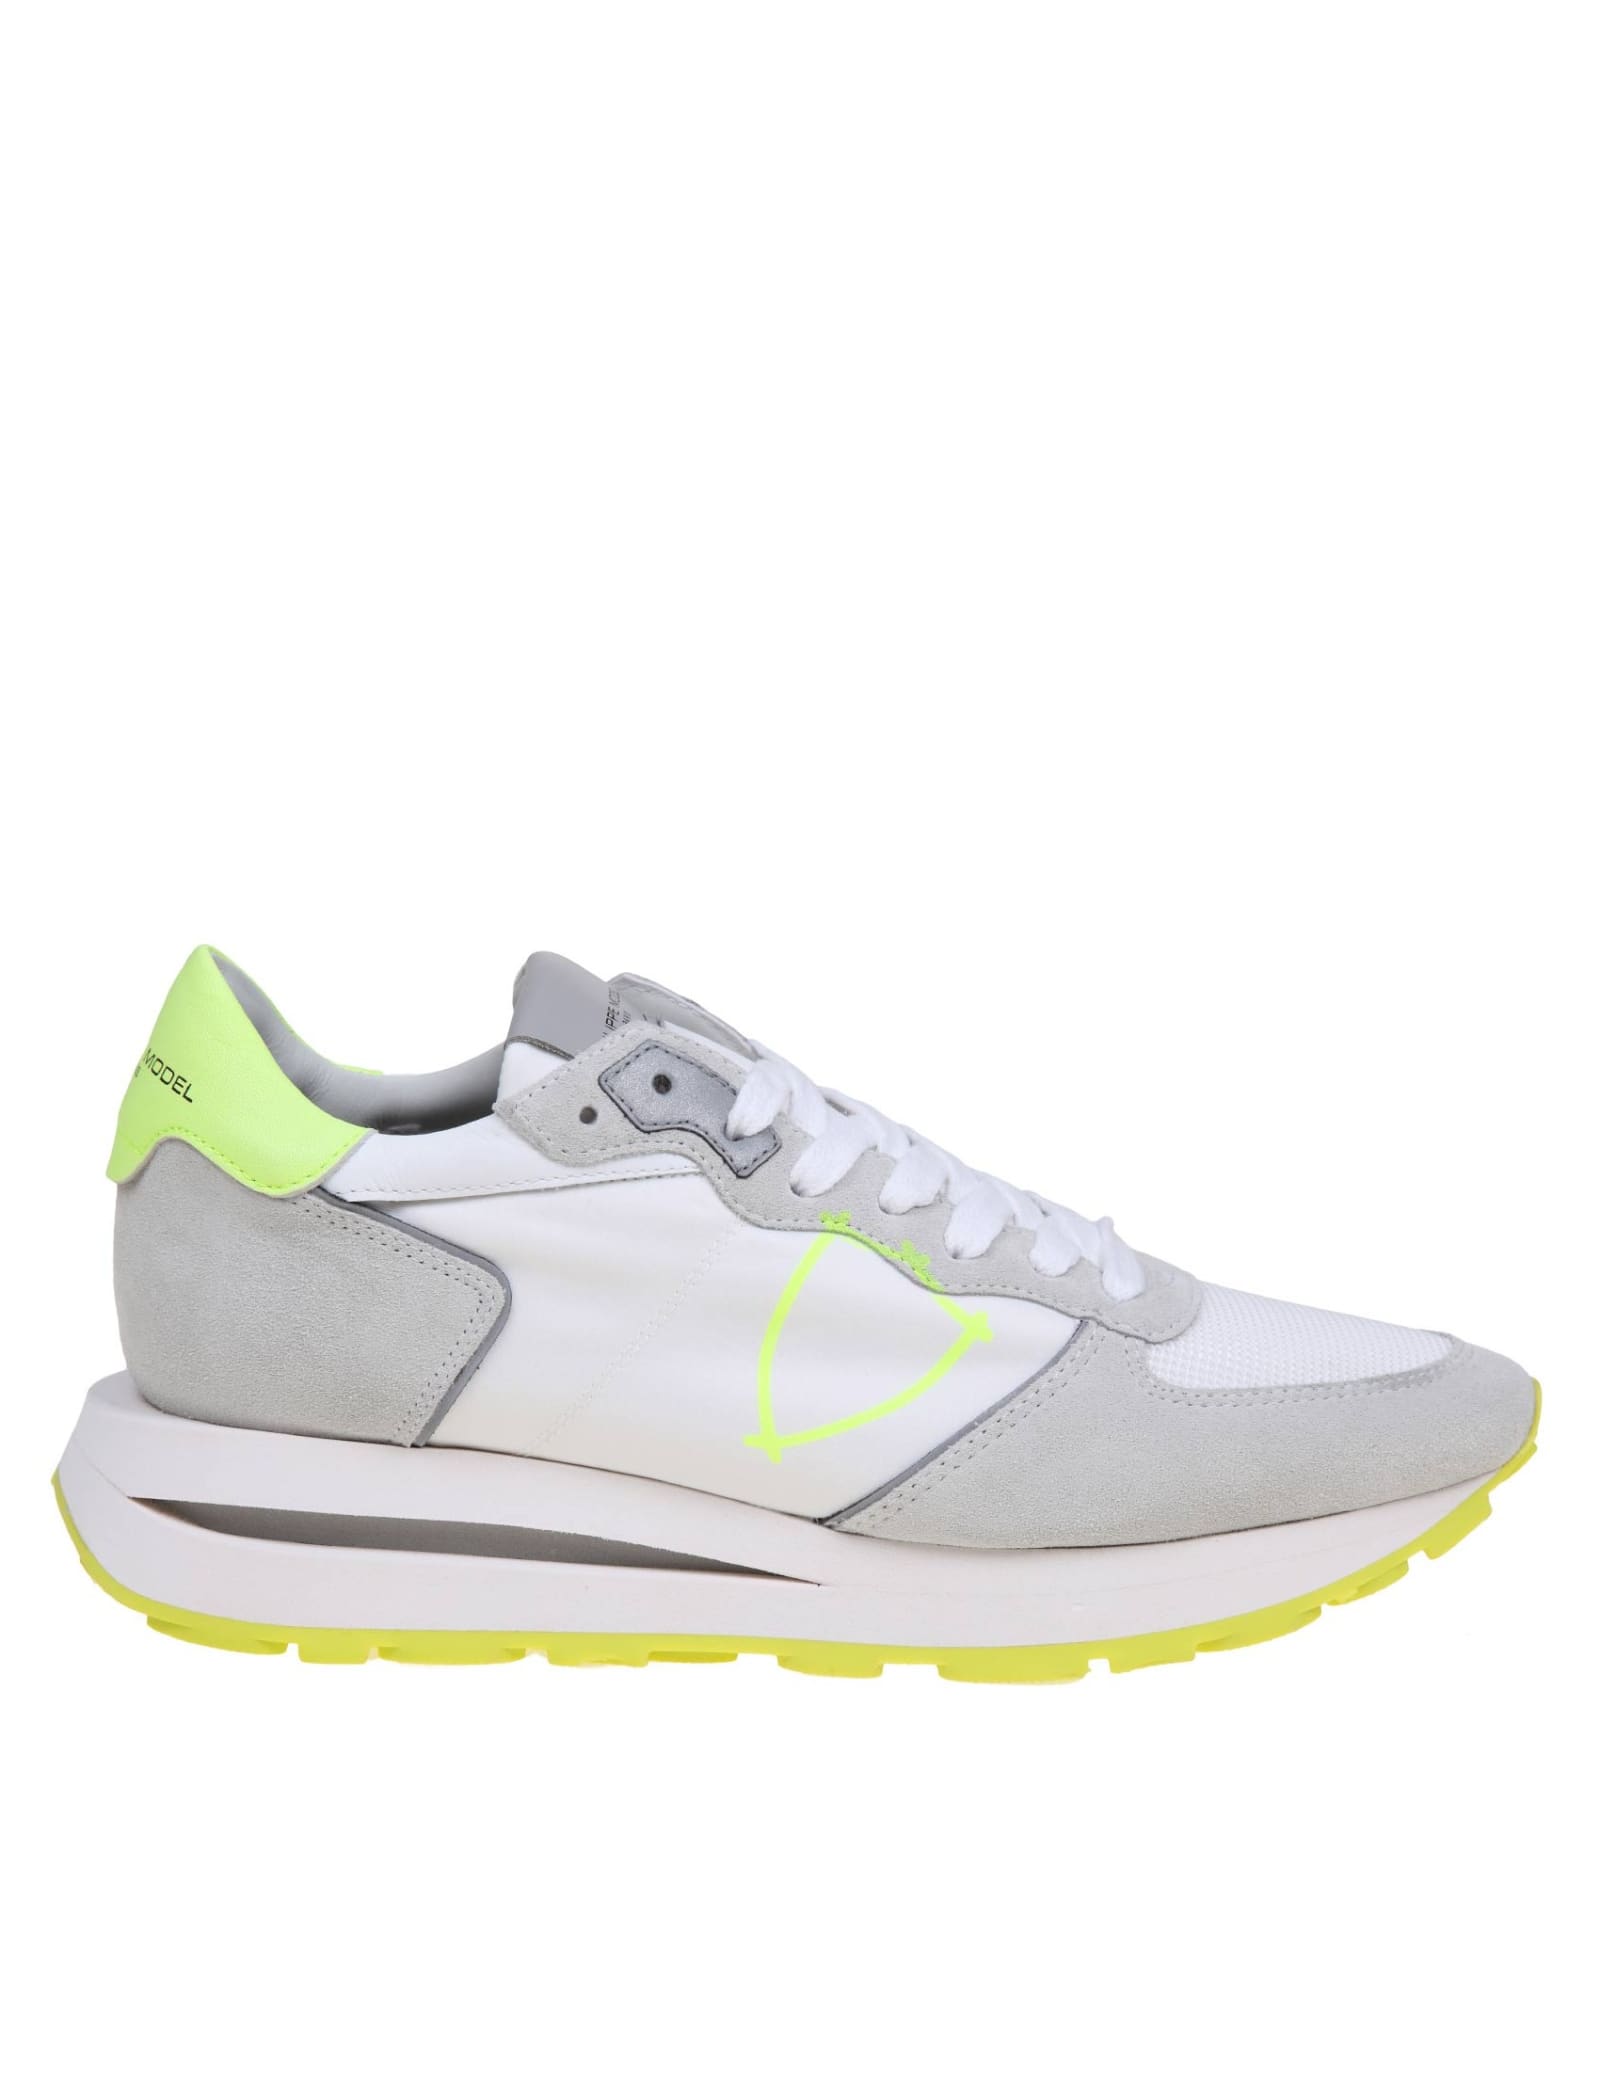 Shop Philippe Model Tropez Haute Low Sneakers In Suede And Nylon Color White And Yellow In Blanc/jaune